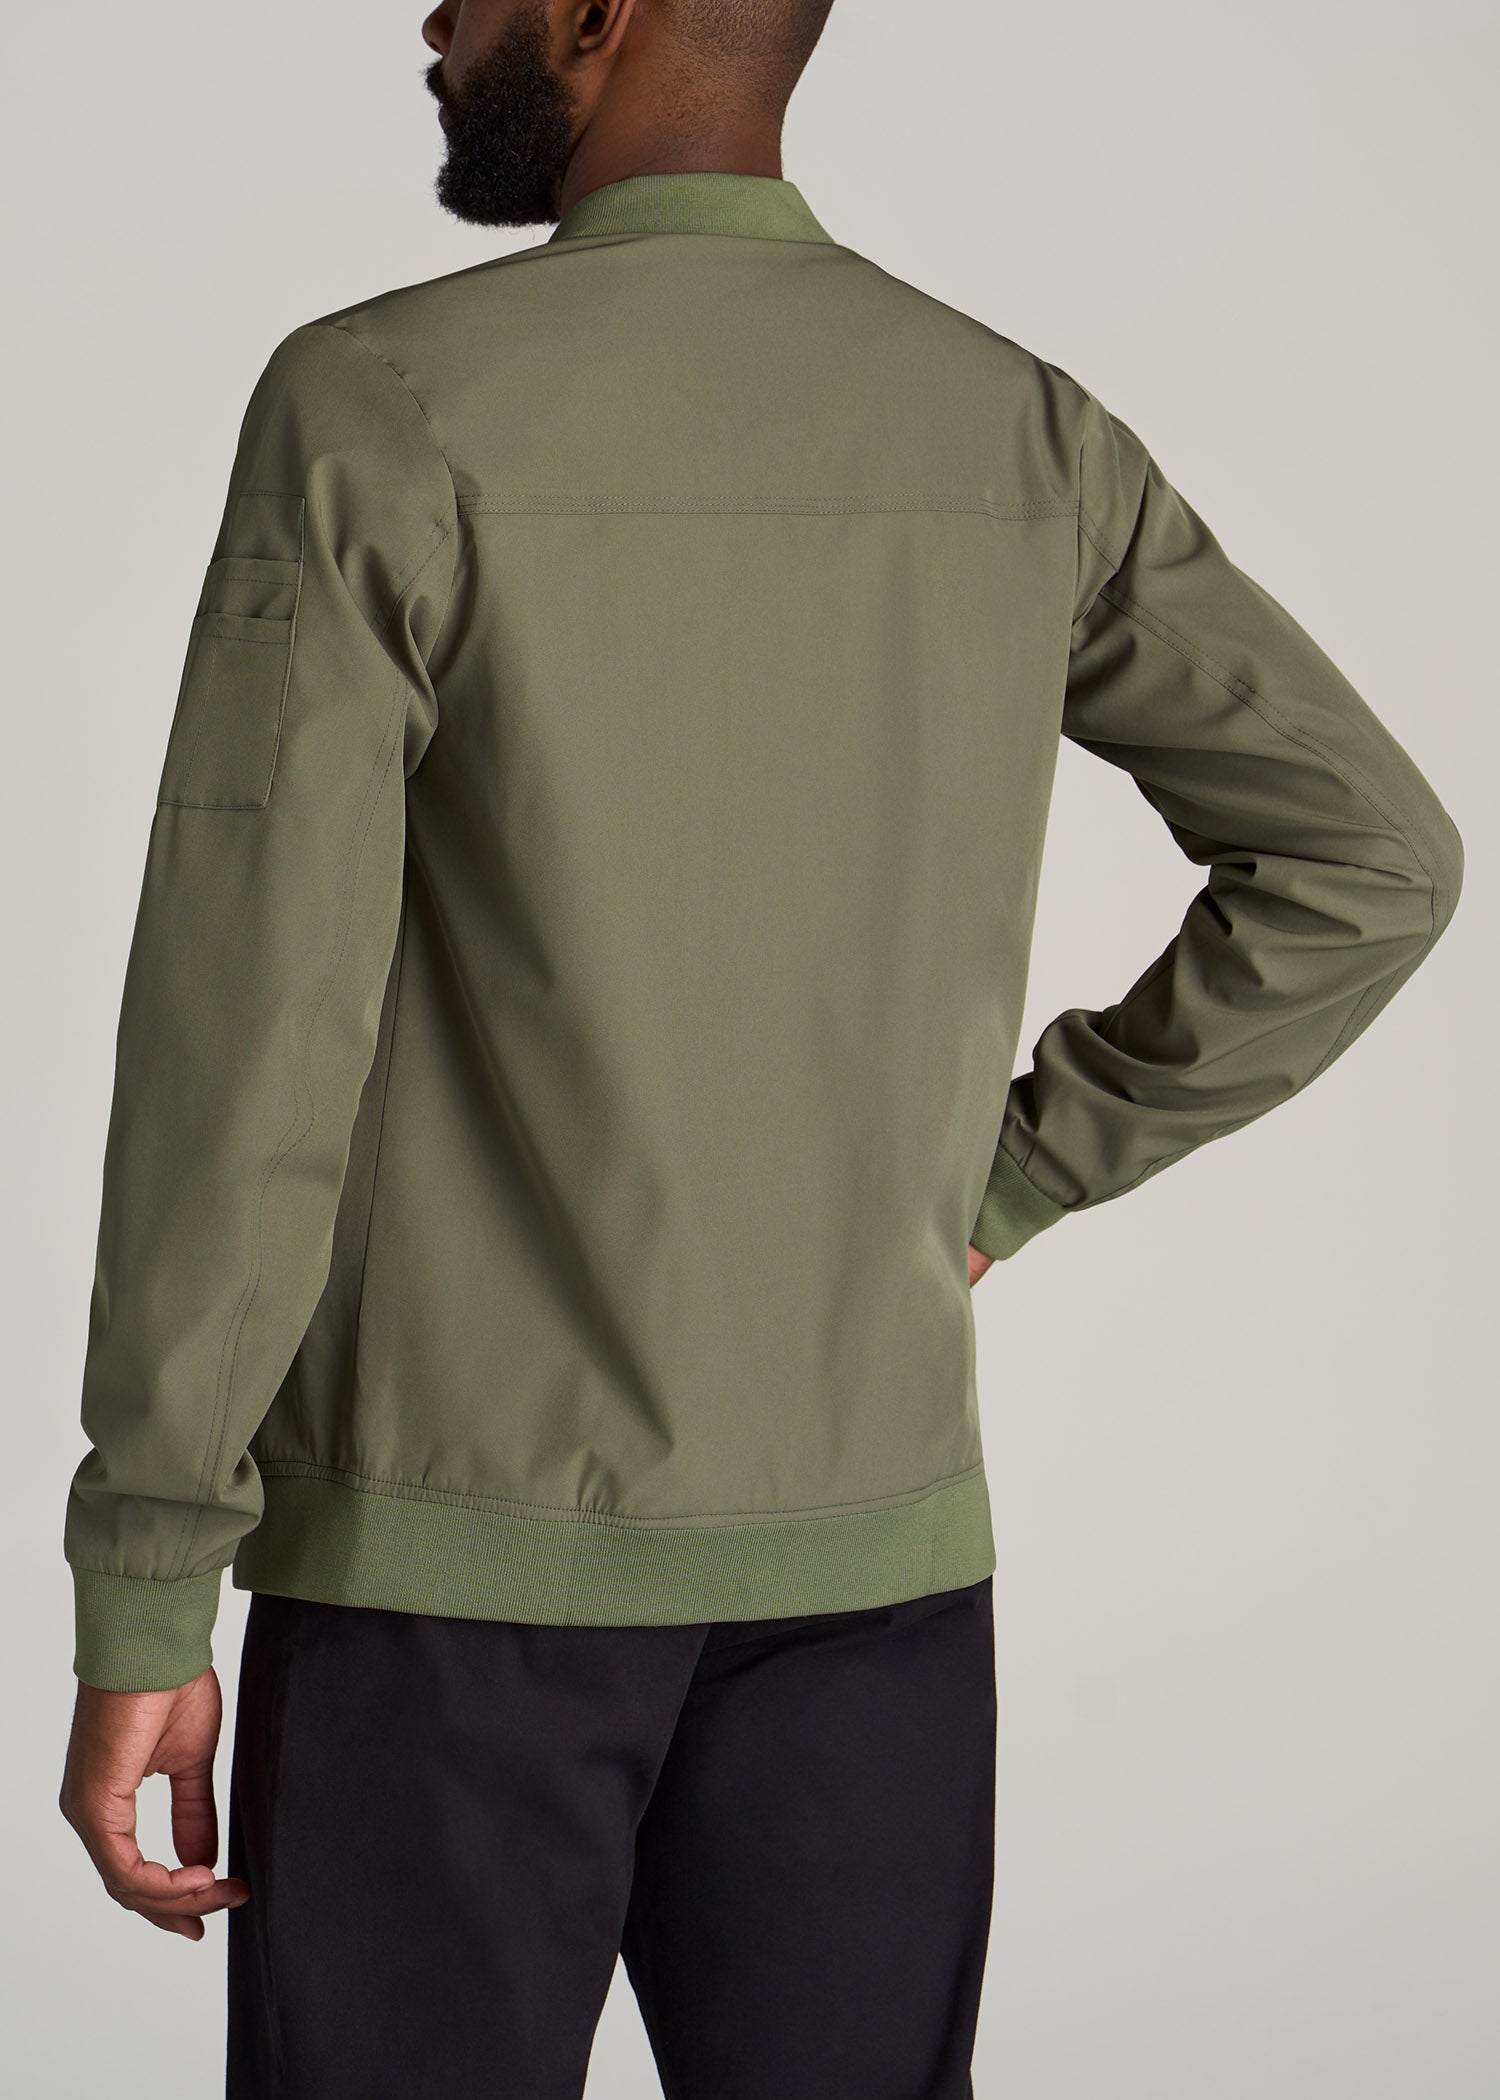 Outfit Of The Day: Olive Green Bomber Jacket & Cargo Pants